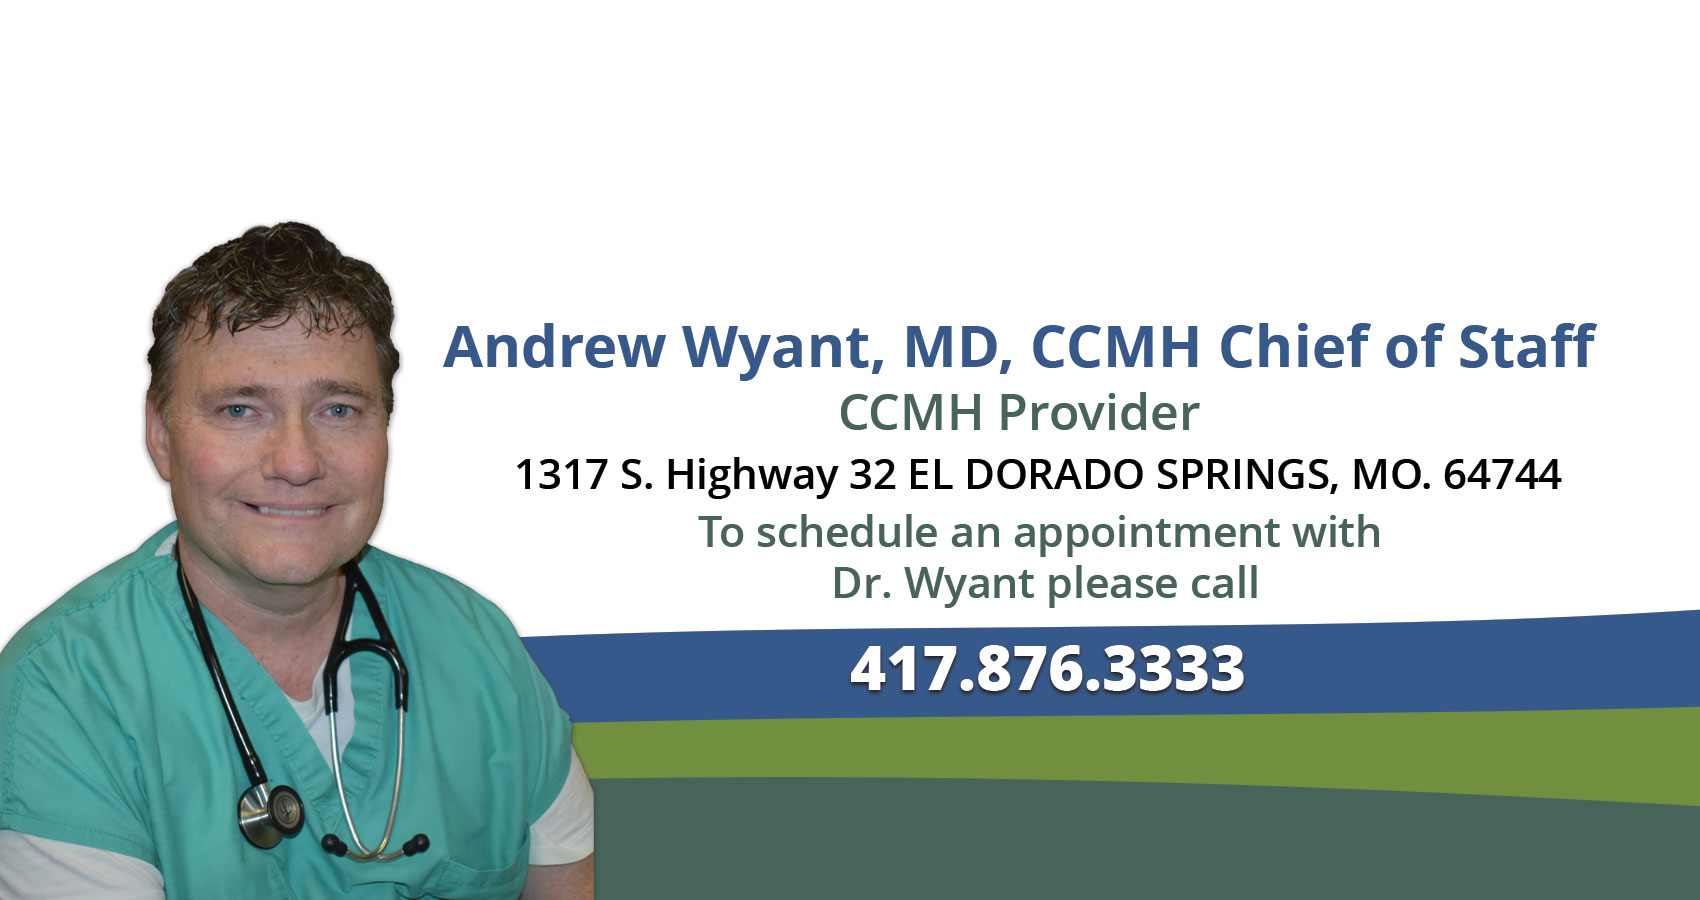 Andrew Wyant, MD, CCMH Chief of Staff
CCMH Provider
1317 S. Highway 32 EL DORADO SPRINGS, MO. 64744
To schedule an appointment with Dr. Wyant please call
417.876.3333